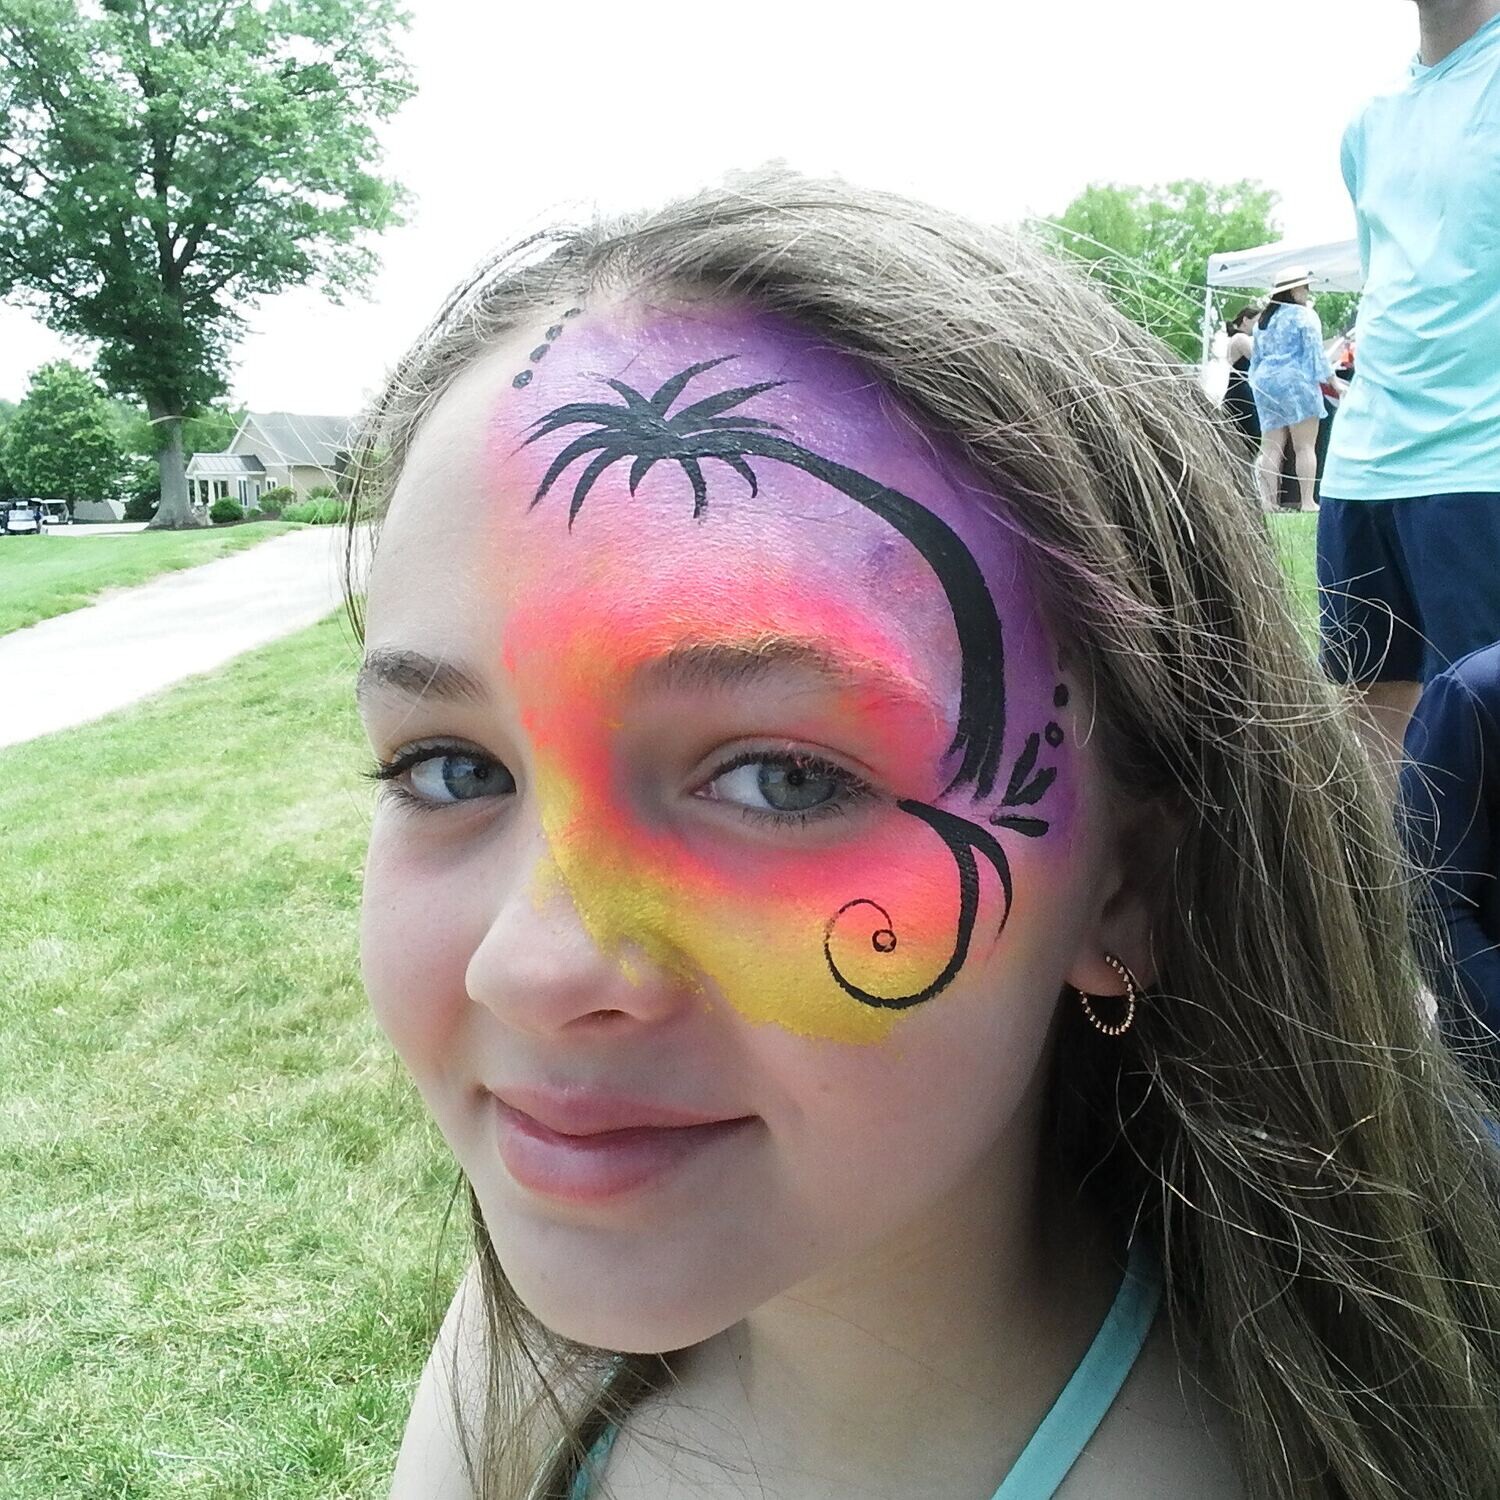 add 30 minutes to face painter who is already booked